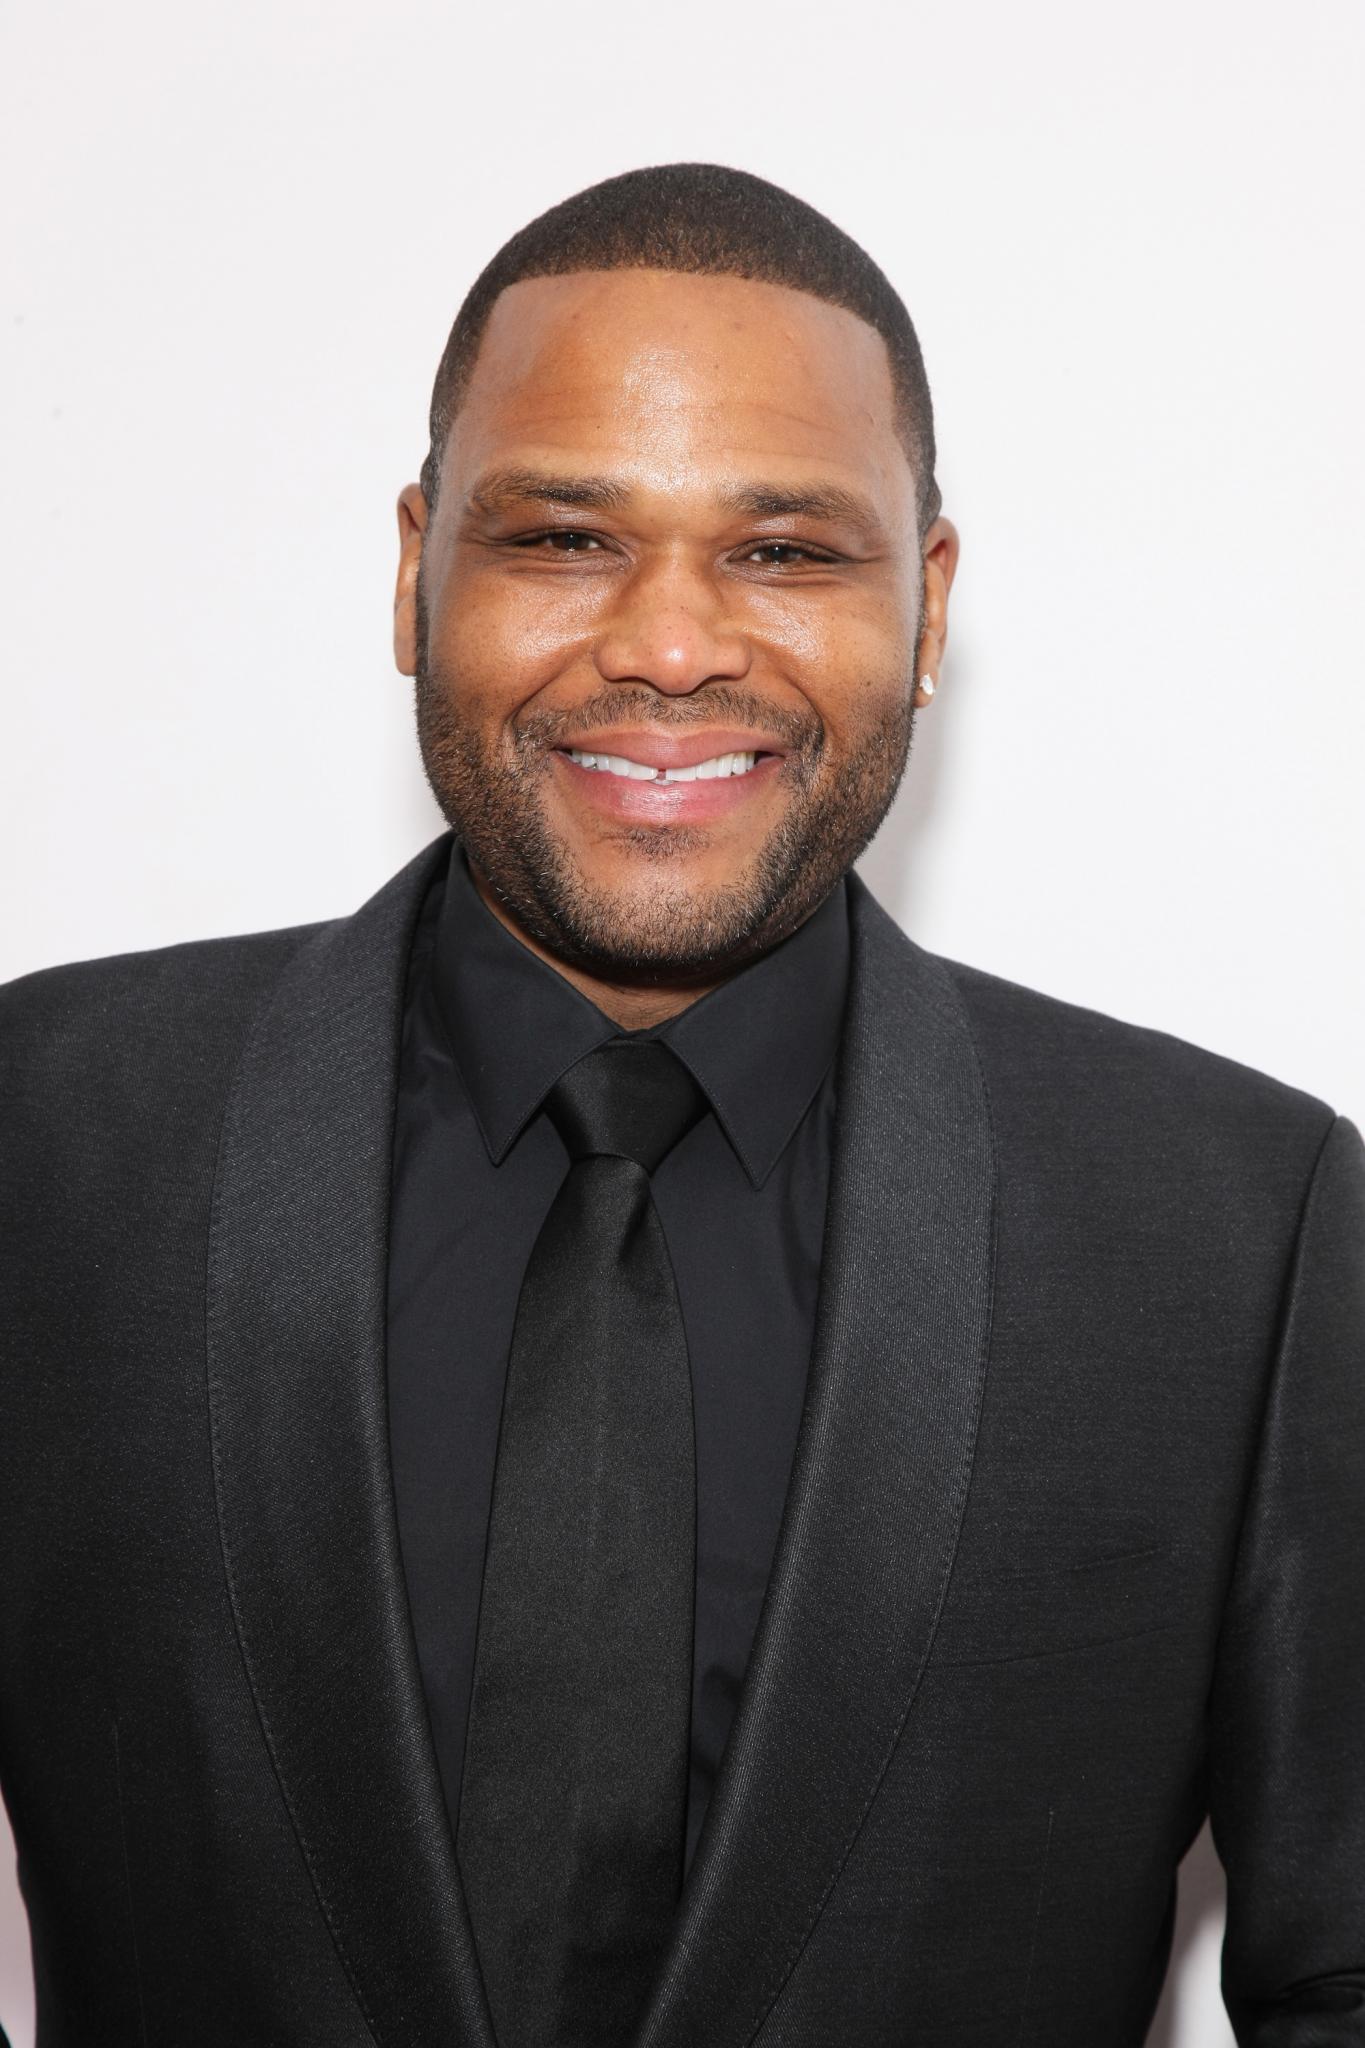 Awkward! Anthony Anderson Reveals His Mother Taught Him How To Pleasure A Woman